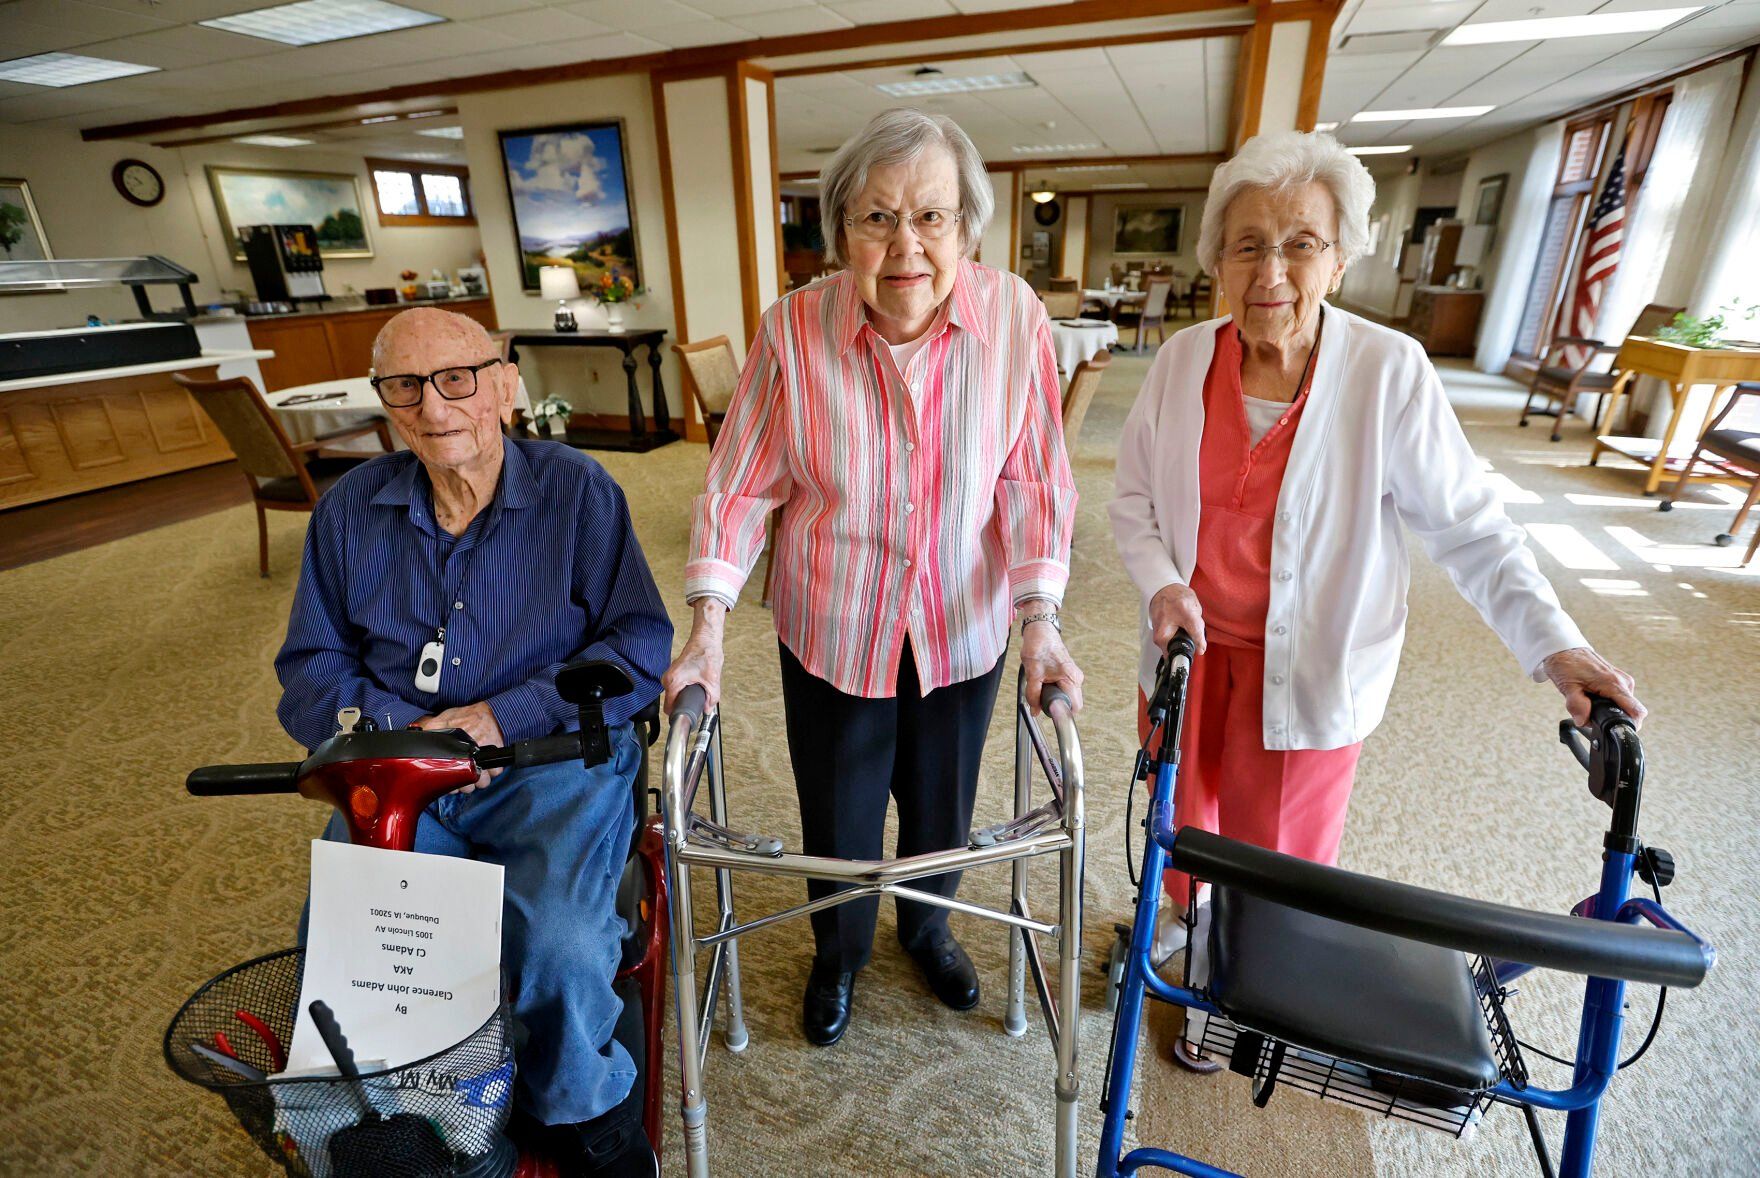 CJ Adams (from left), Peg Meyers and Marge Nauman are all residents at Bethany Home in Dubuque.    PHOTO CREDIT: JESSICA REILLY
Telegraph Herald